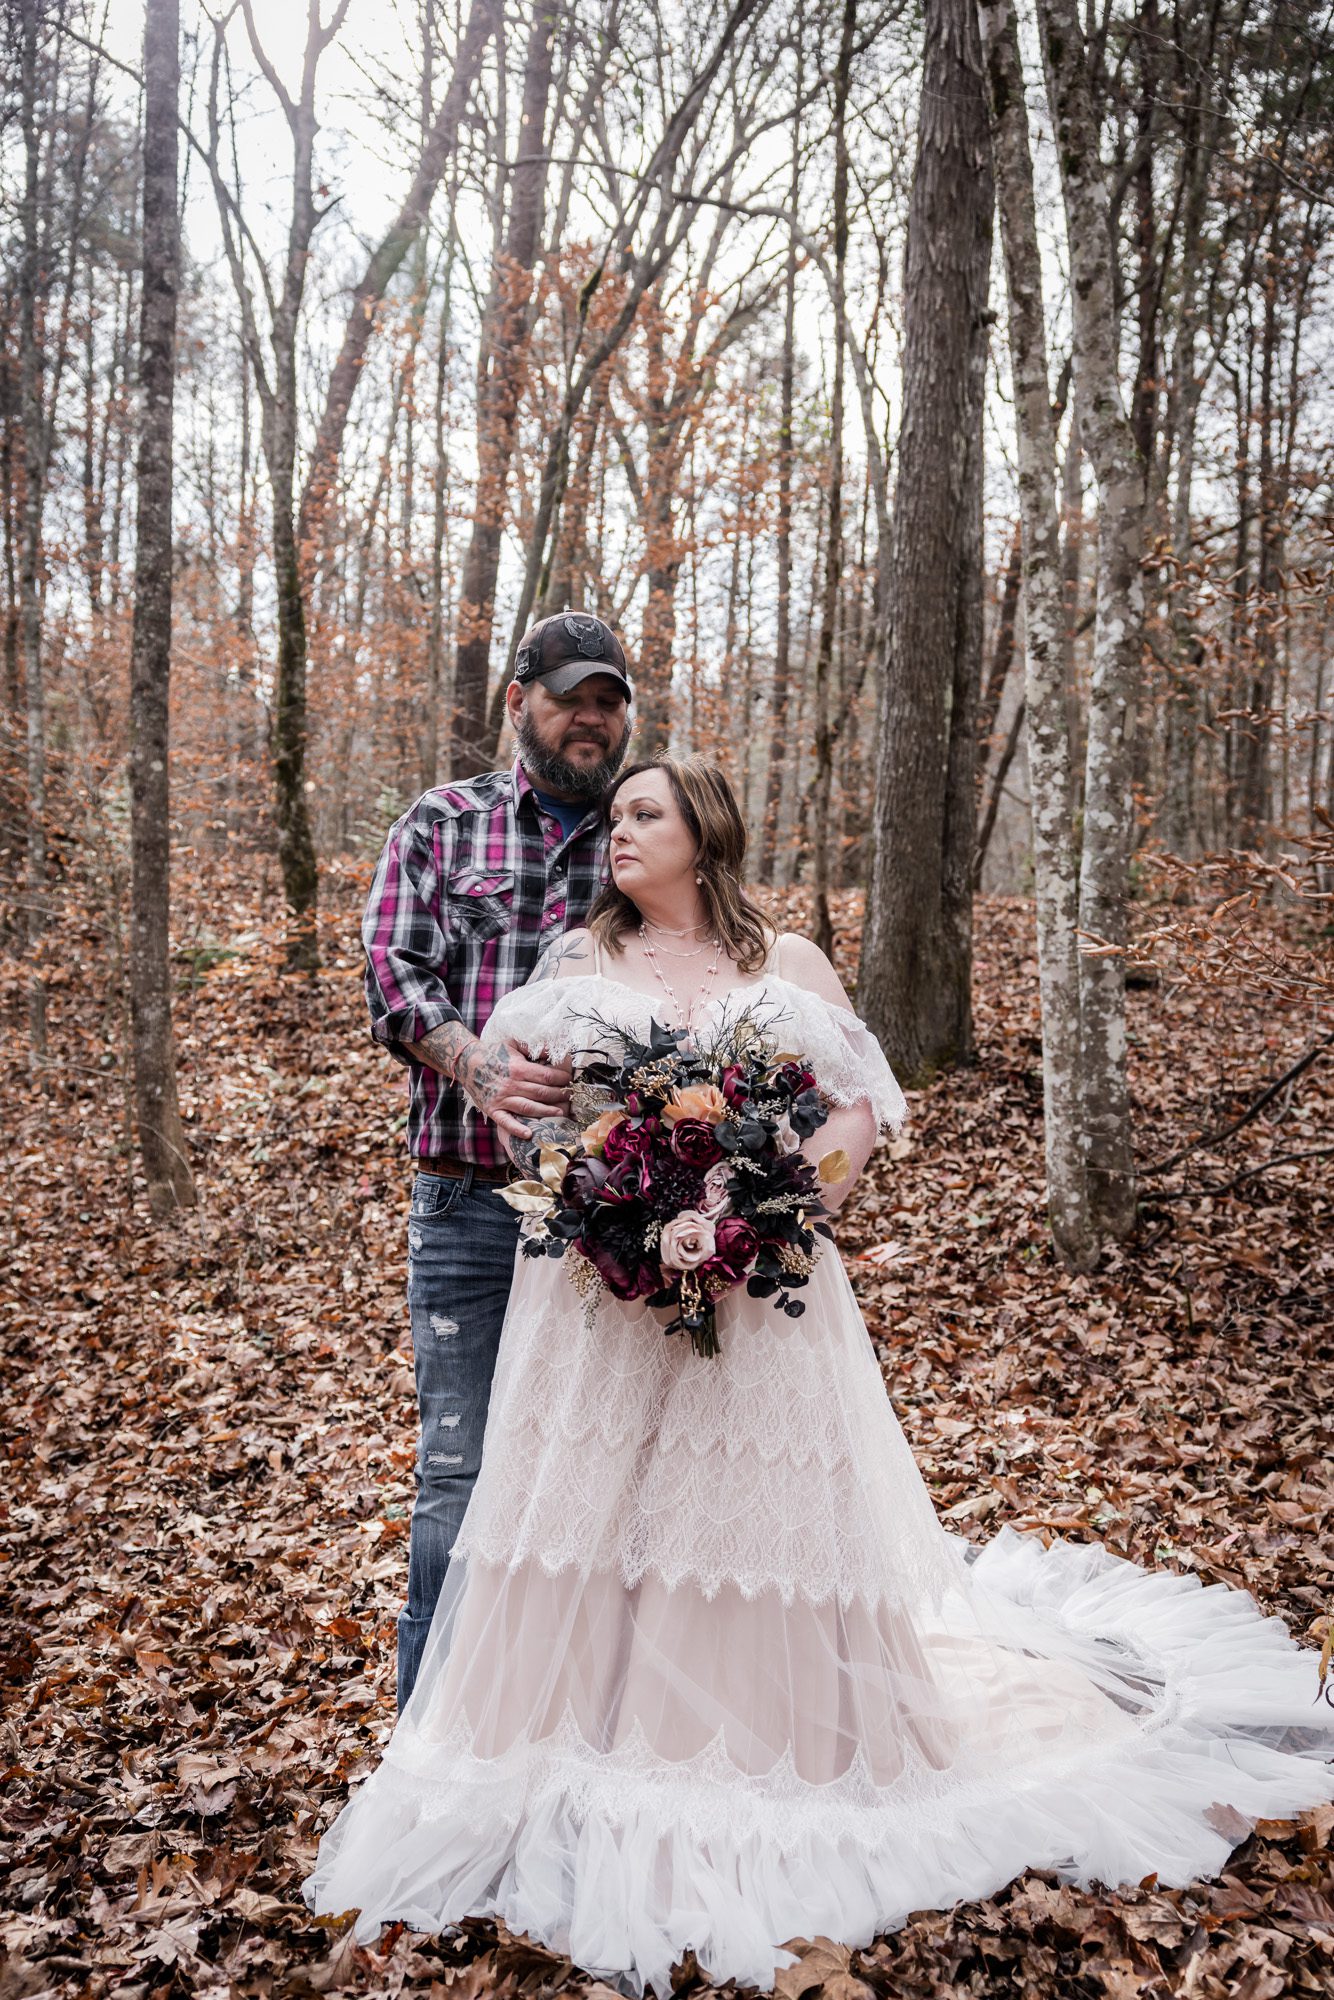 Woodsy bride and groom portrait